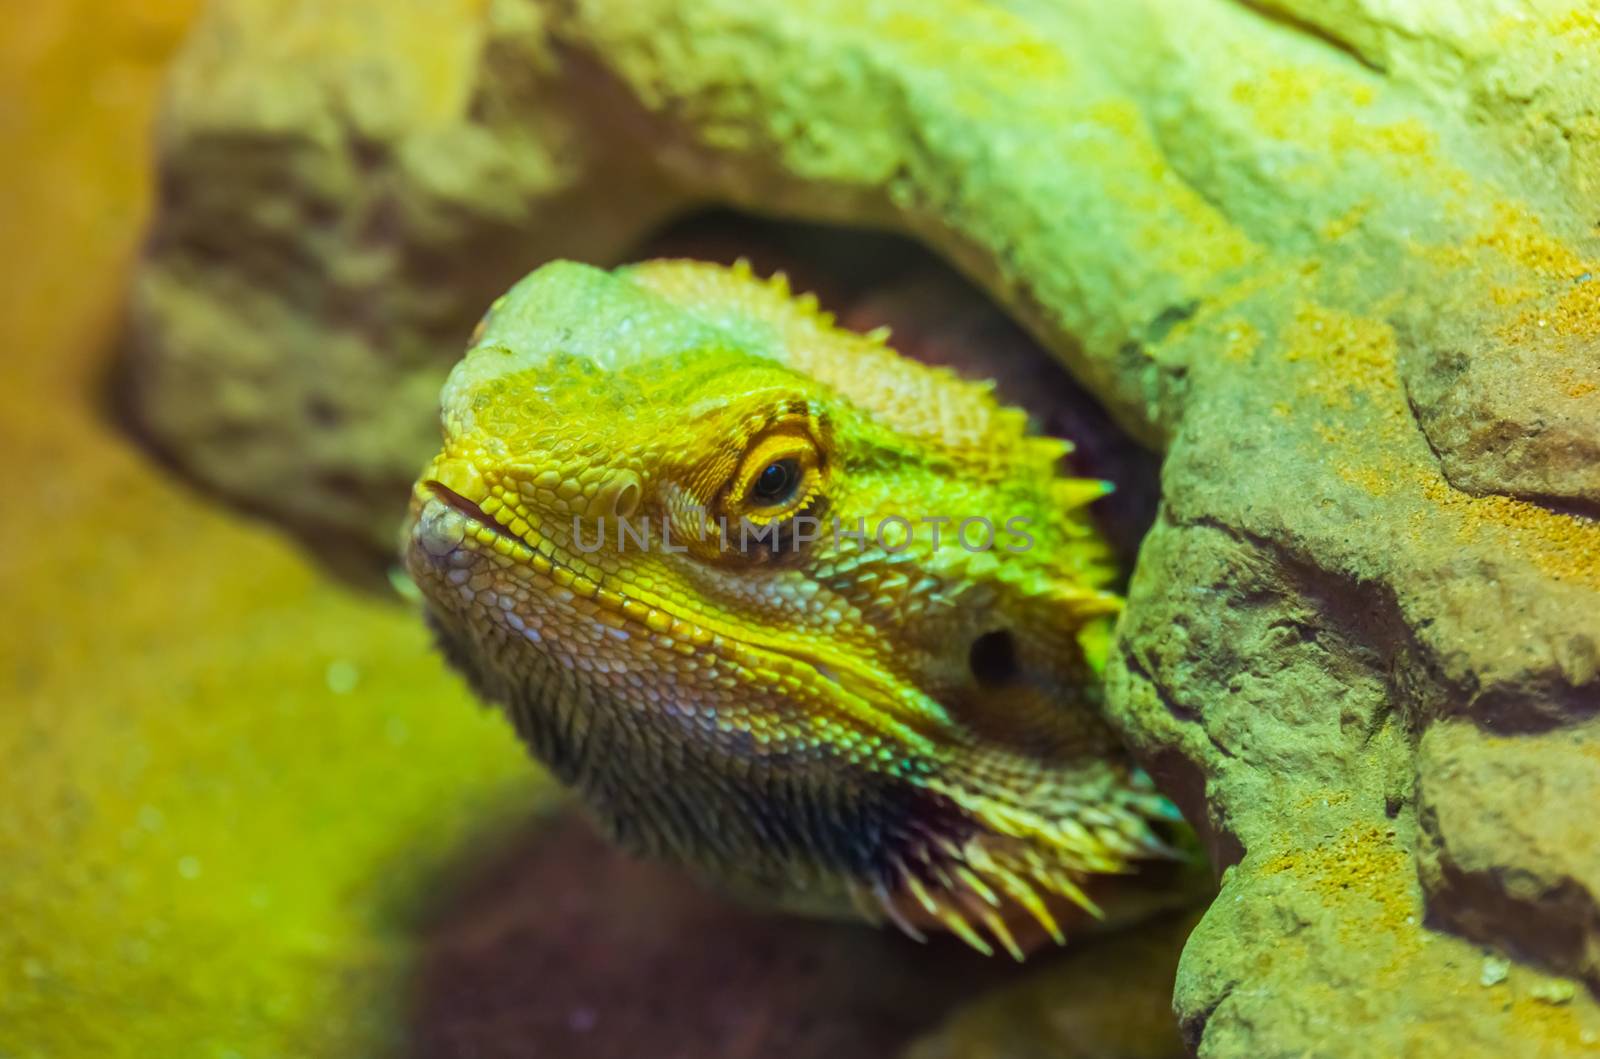 the face of a bearded dragon lizard that is hiding under a rock, tropical reptile specie, popular terrarium pet in herpetoculture by charlottebleijenberg